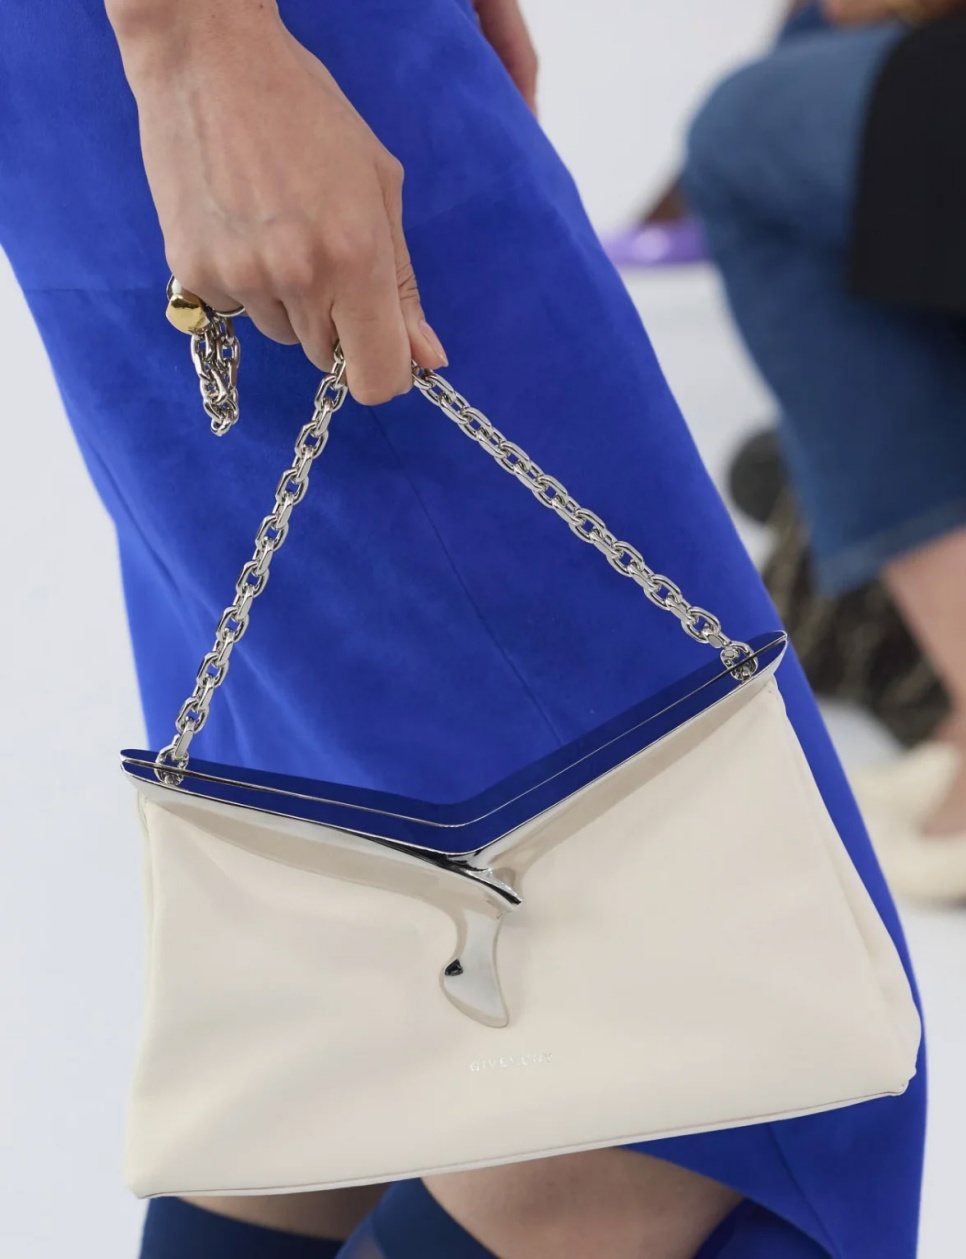 Bags with Sculptural Shapes